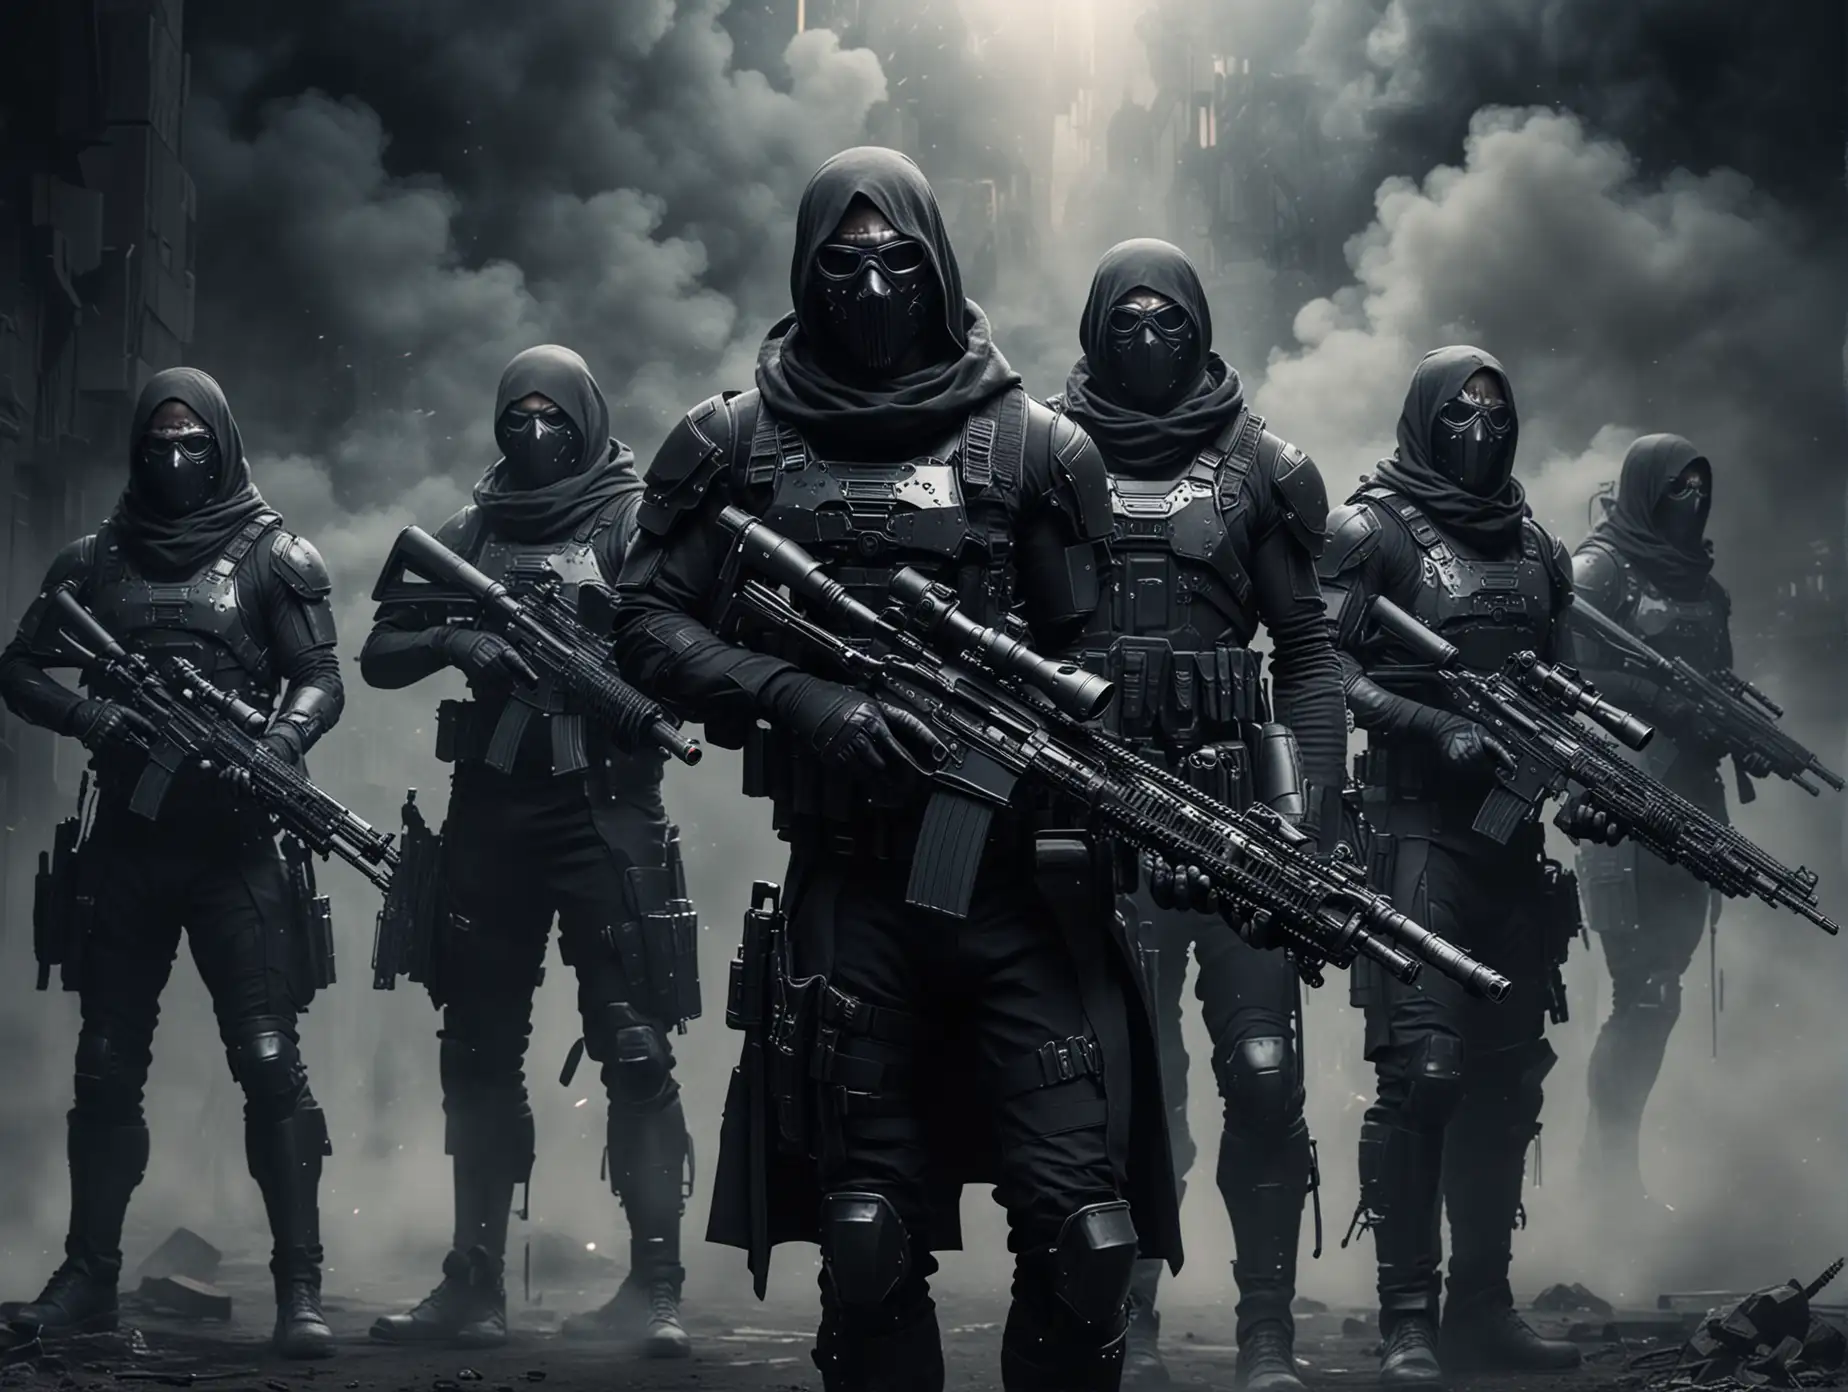 A futuristic masked sniper army with very long and big sniper rifles. In a black, smoky sci-fi background.